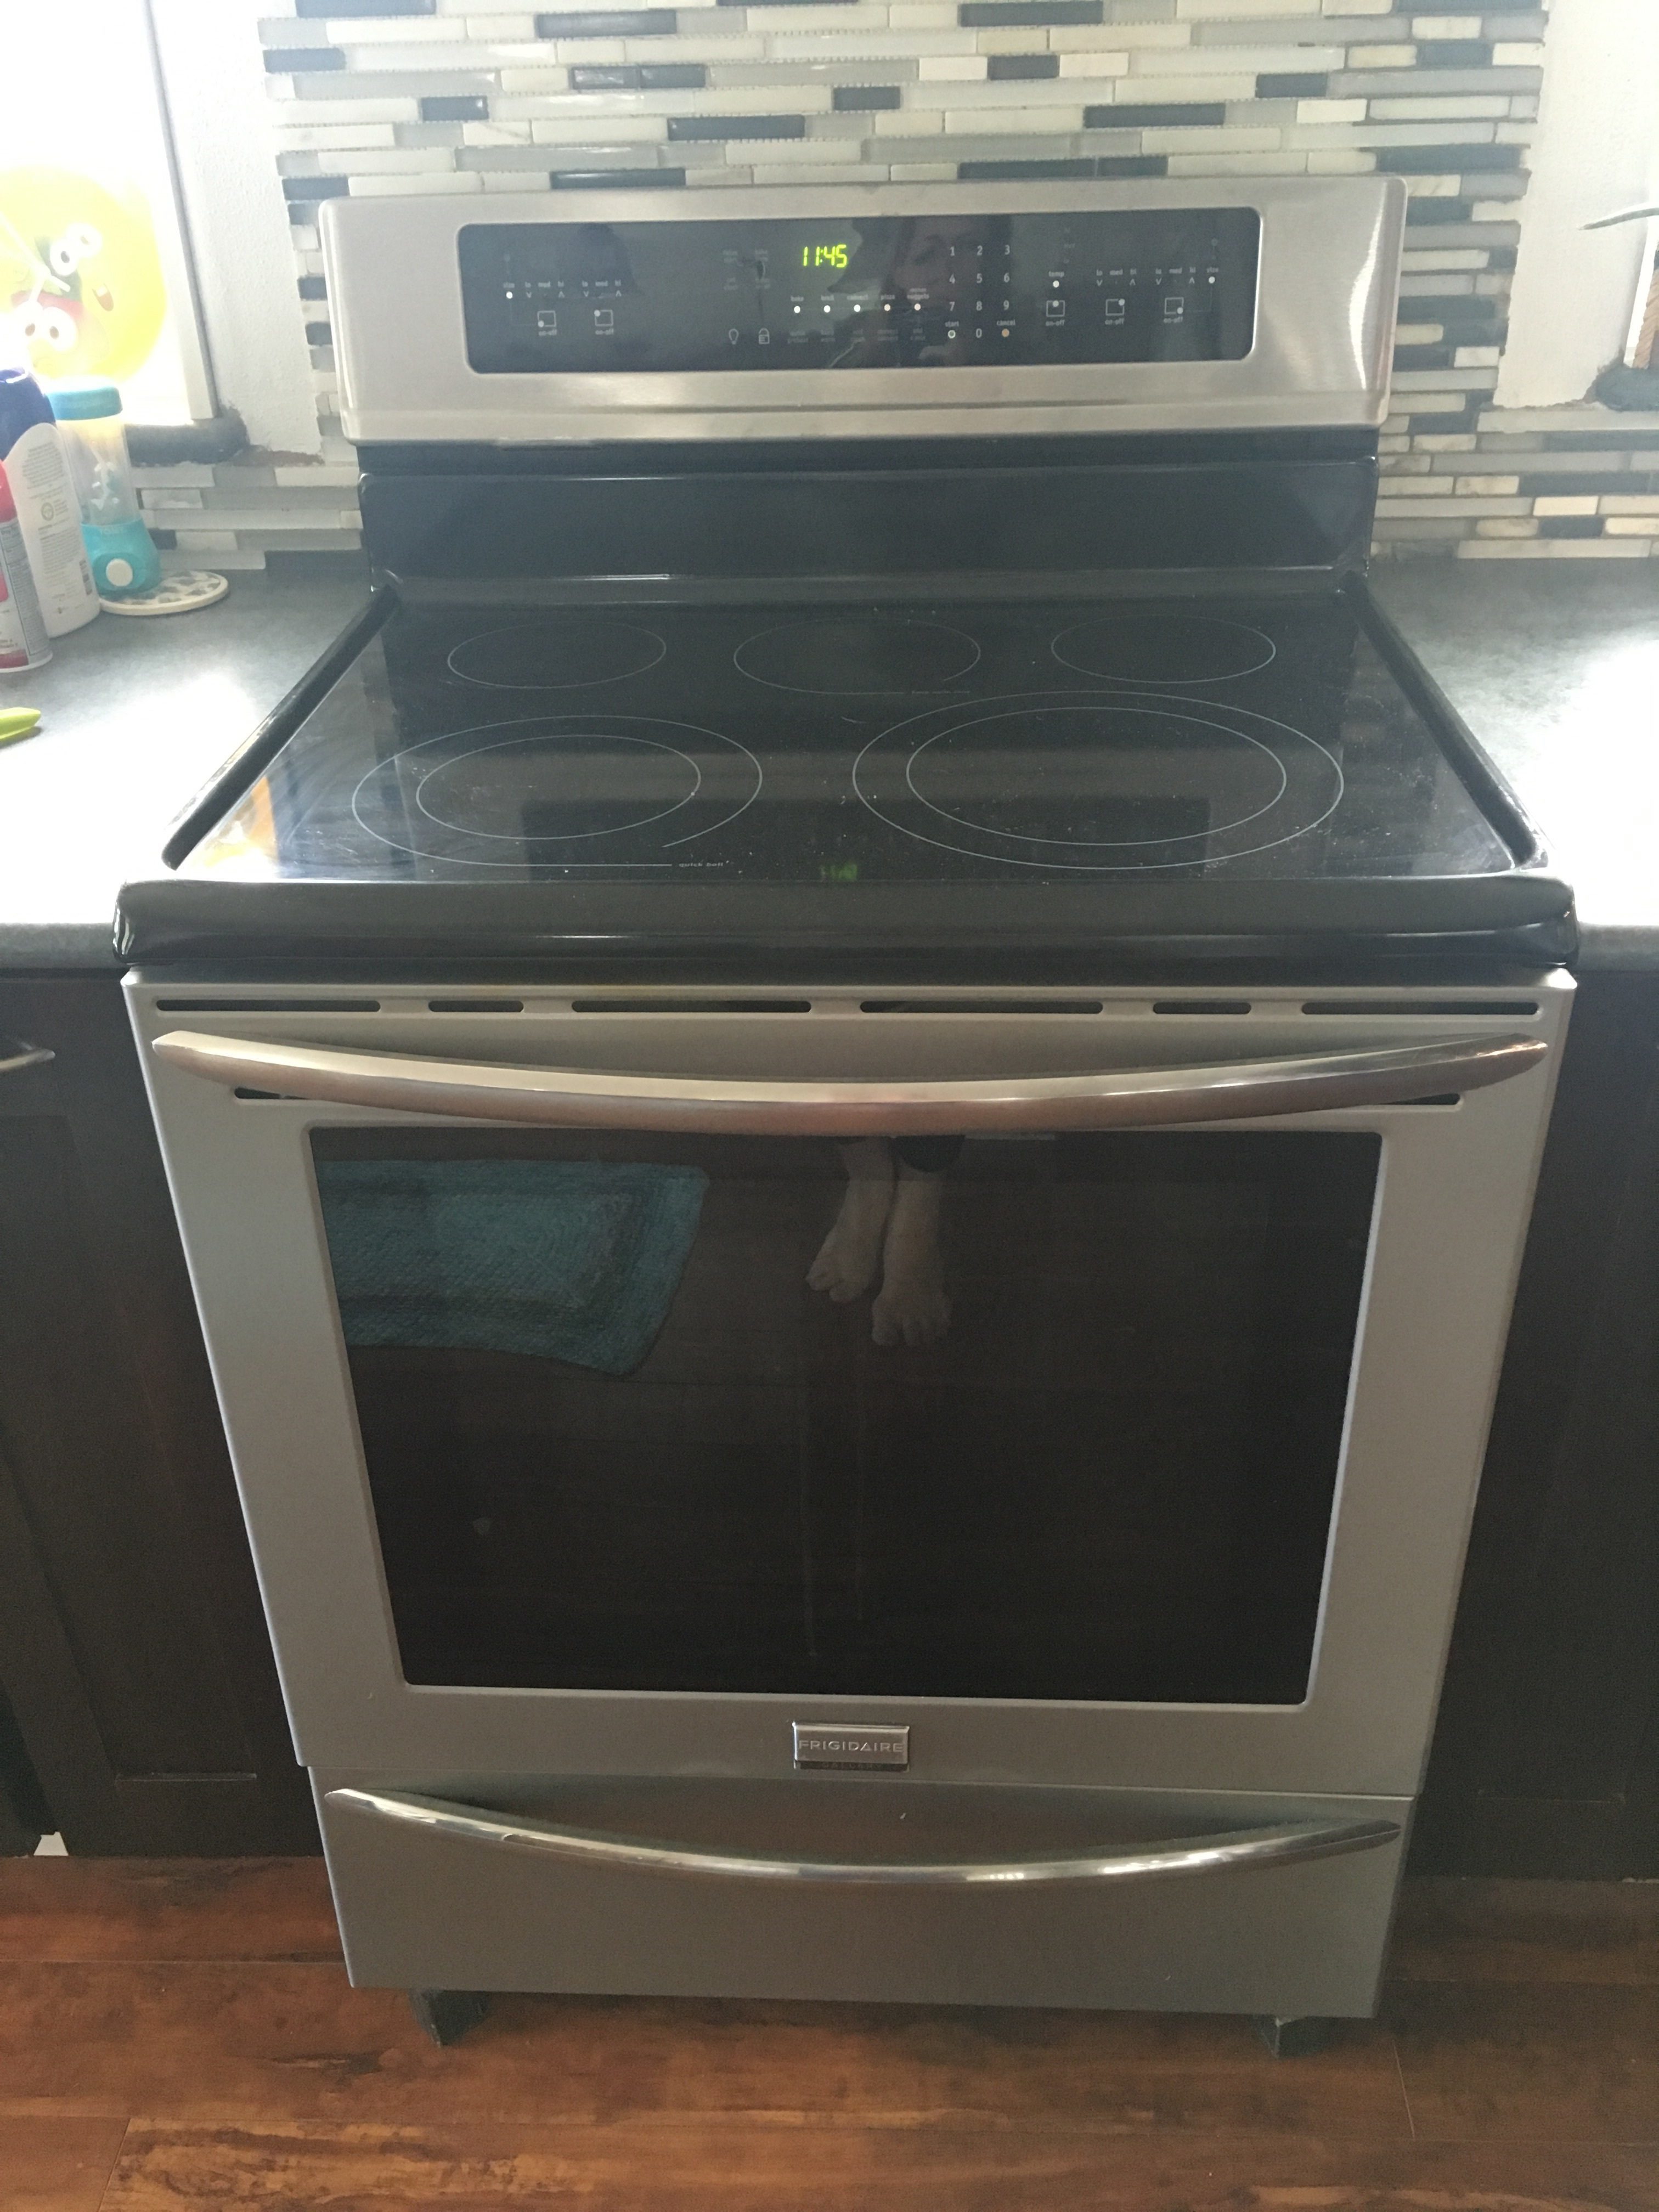 Do Frigidaire gallery oven manuals offer troubleshooting for problems?